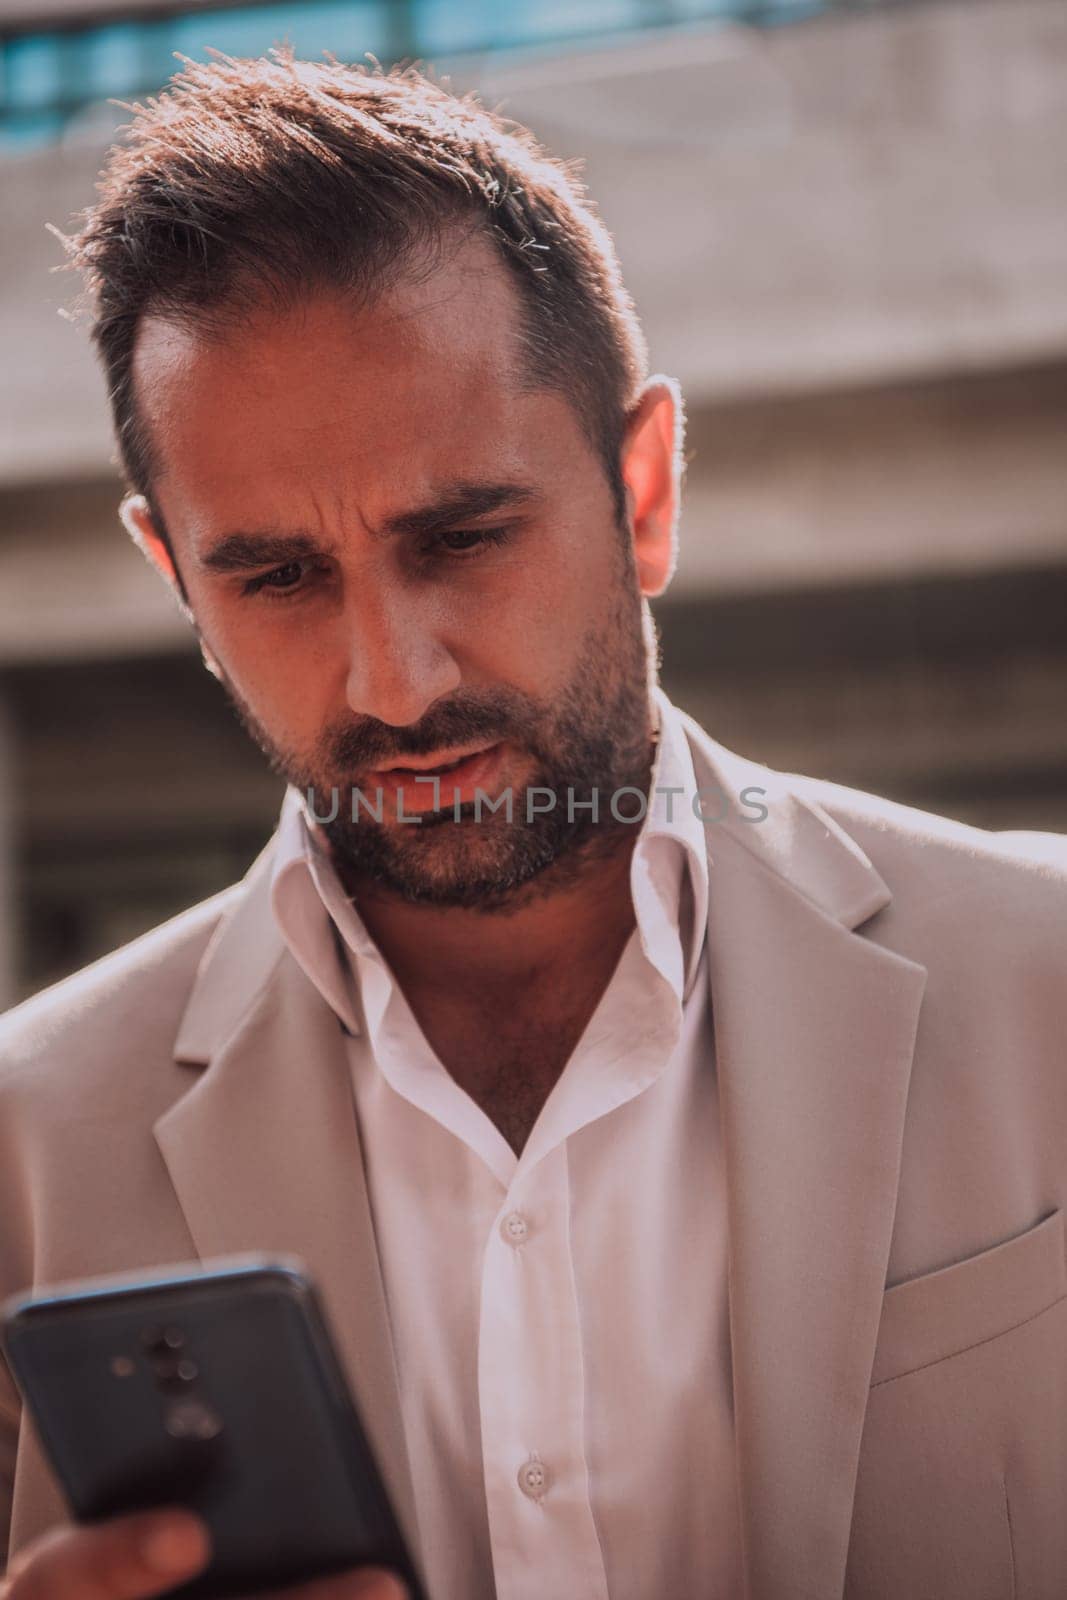 A businessman using his smartphone outdoors, showcasing the seamless integration of technology and mobility in modern professional life